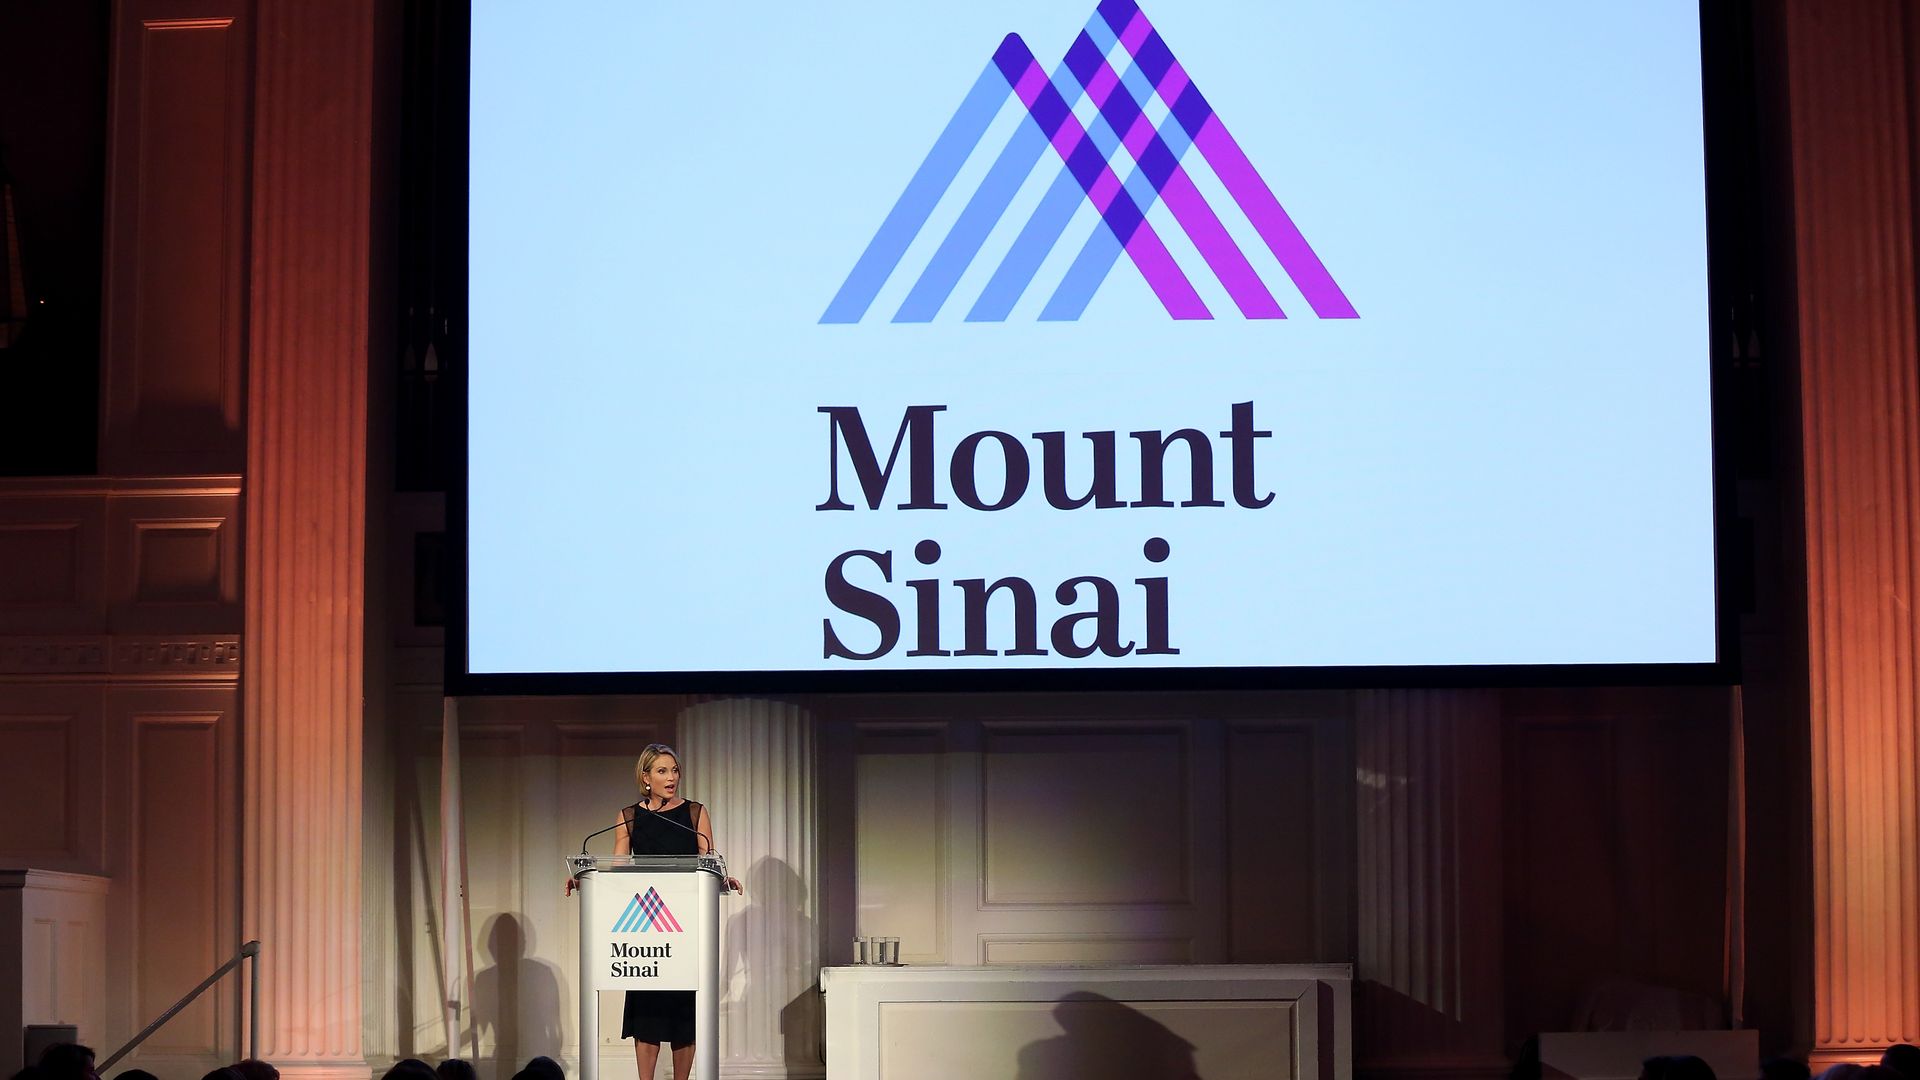 A woman speaks near a large white screen that displays the blue and pink logo for Mount Sinai Health System.